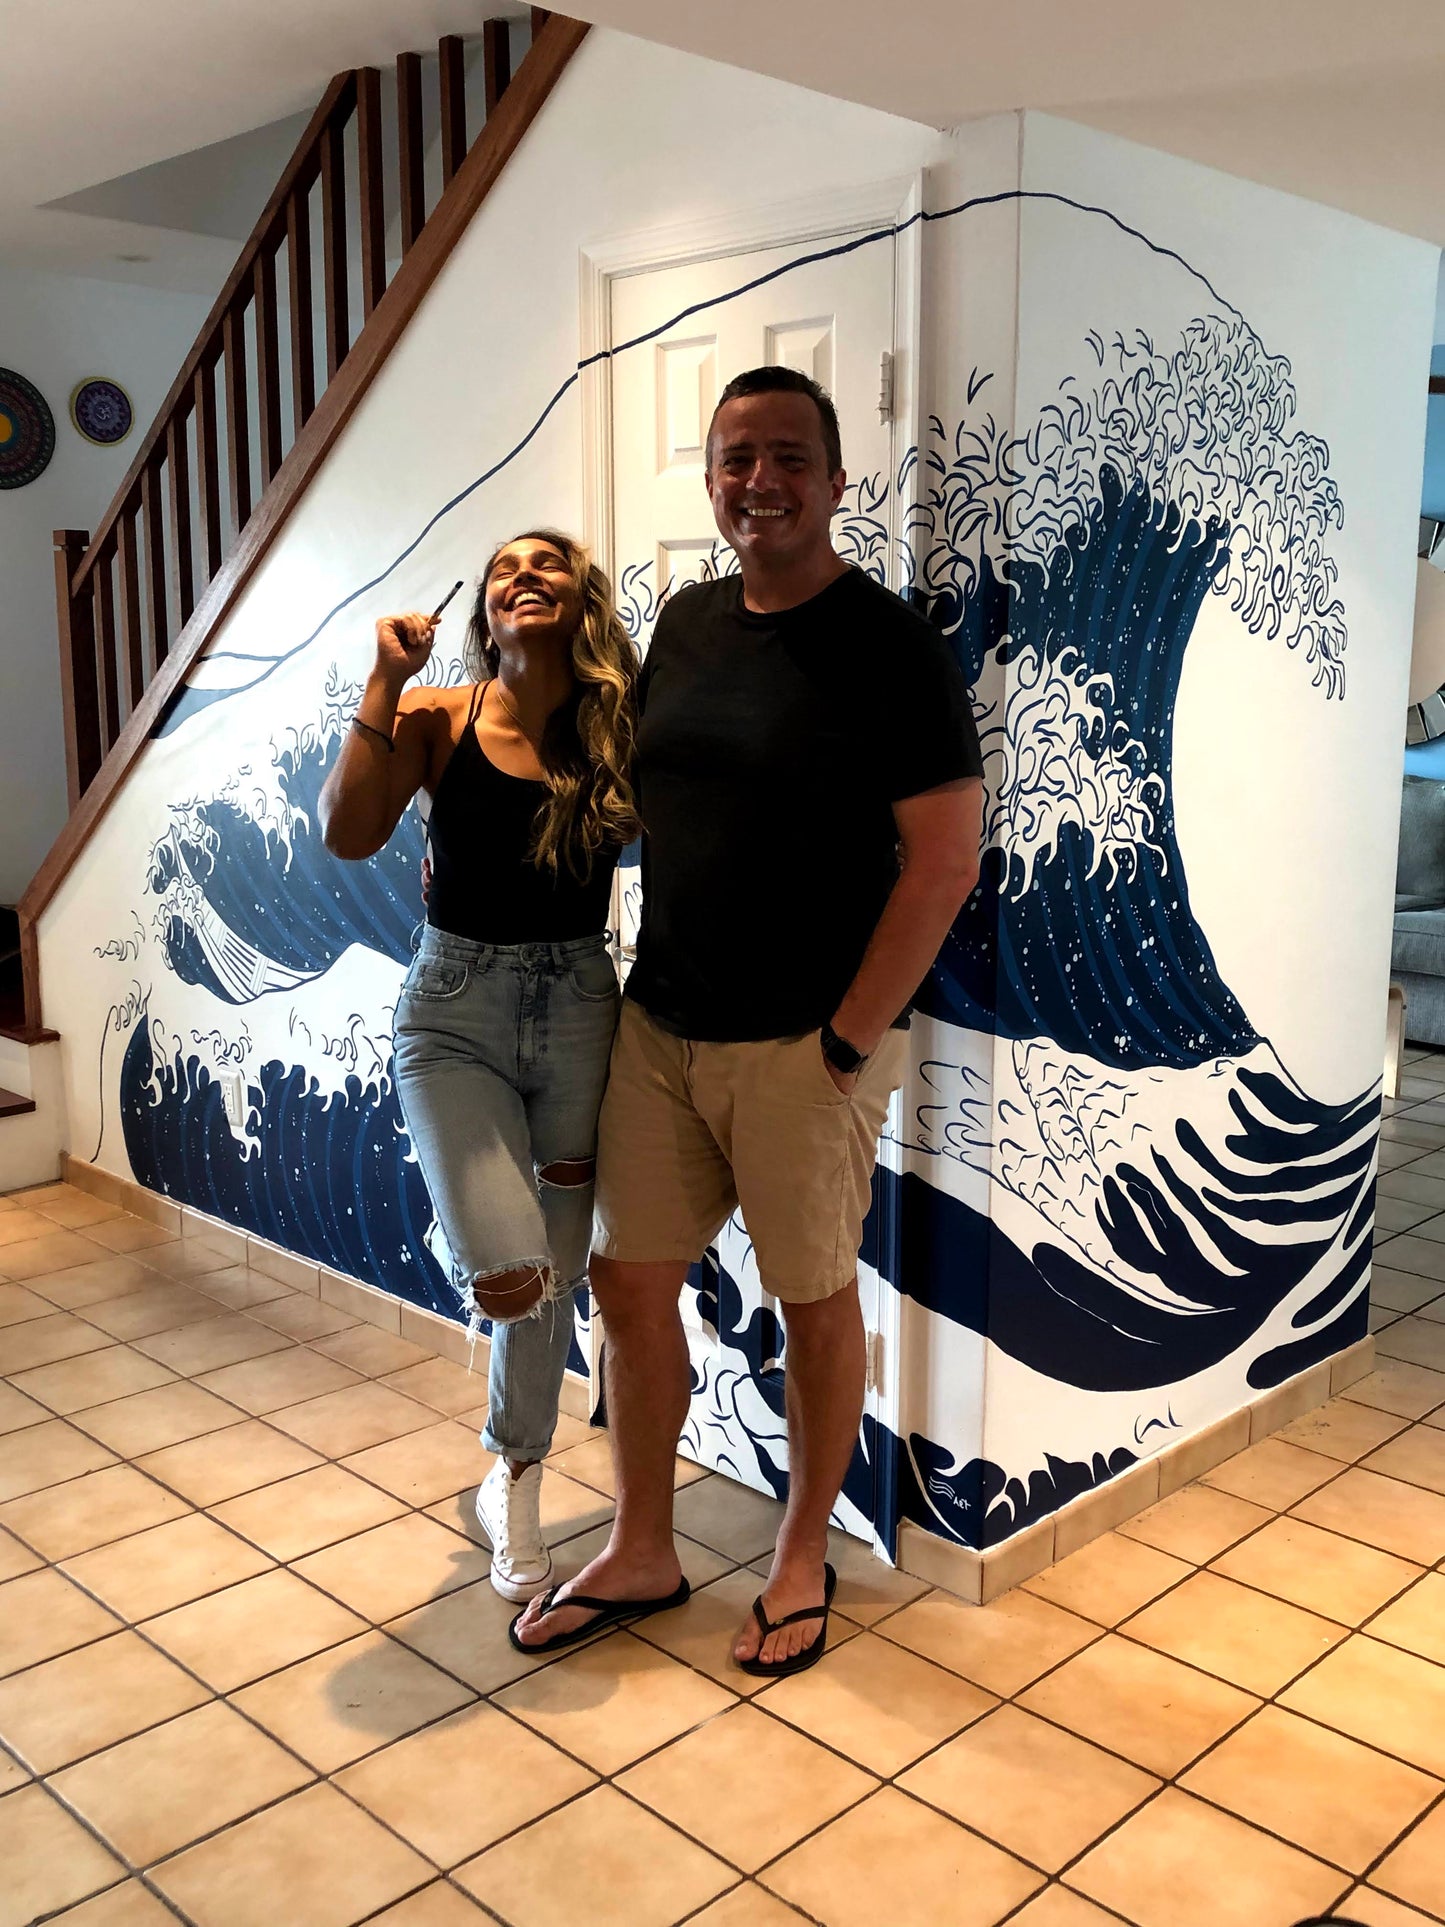 The Blue Wave Mural